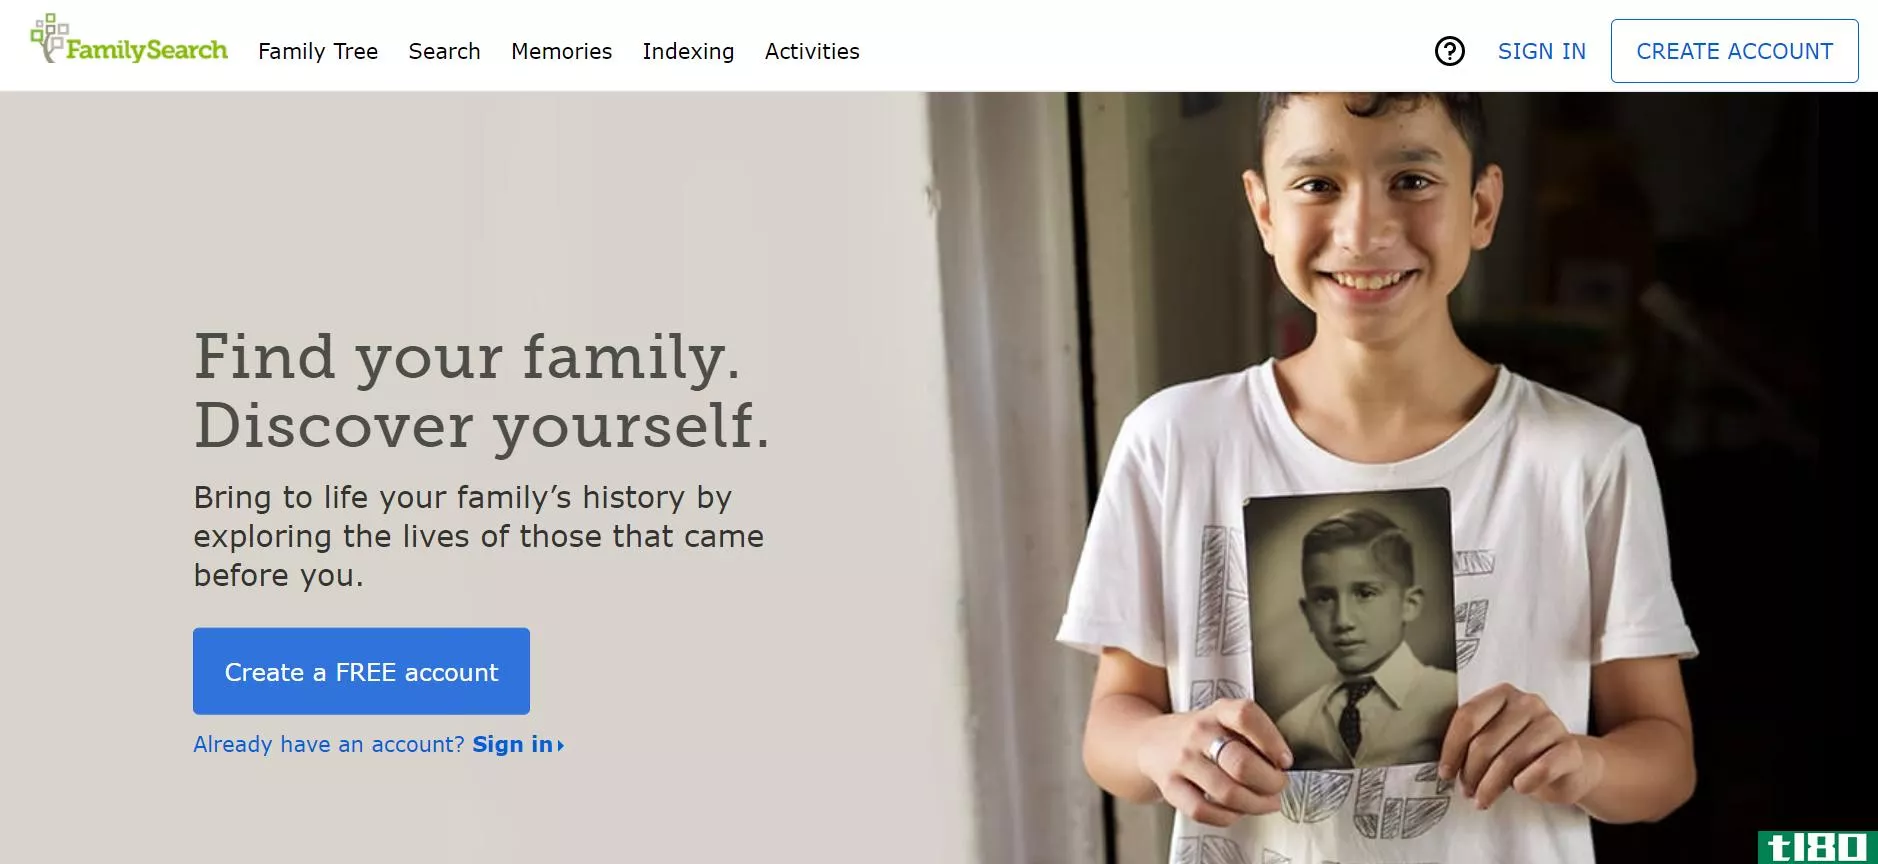 FamilySearch homepage